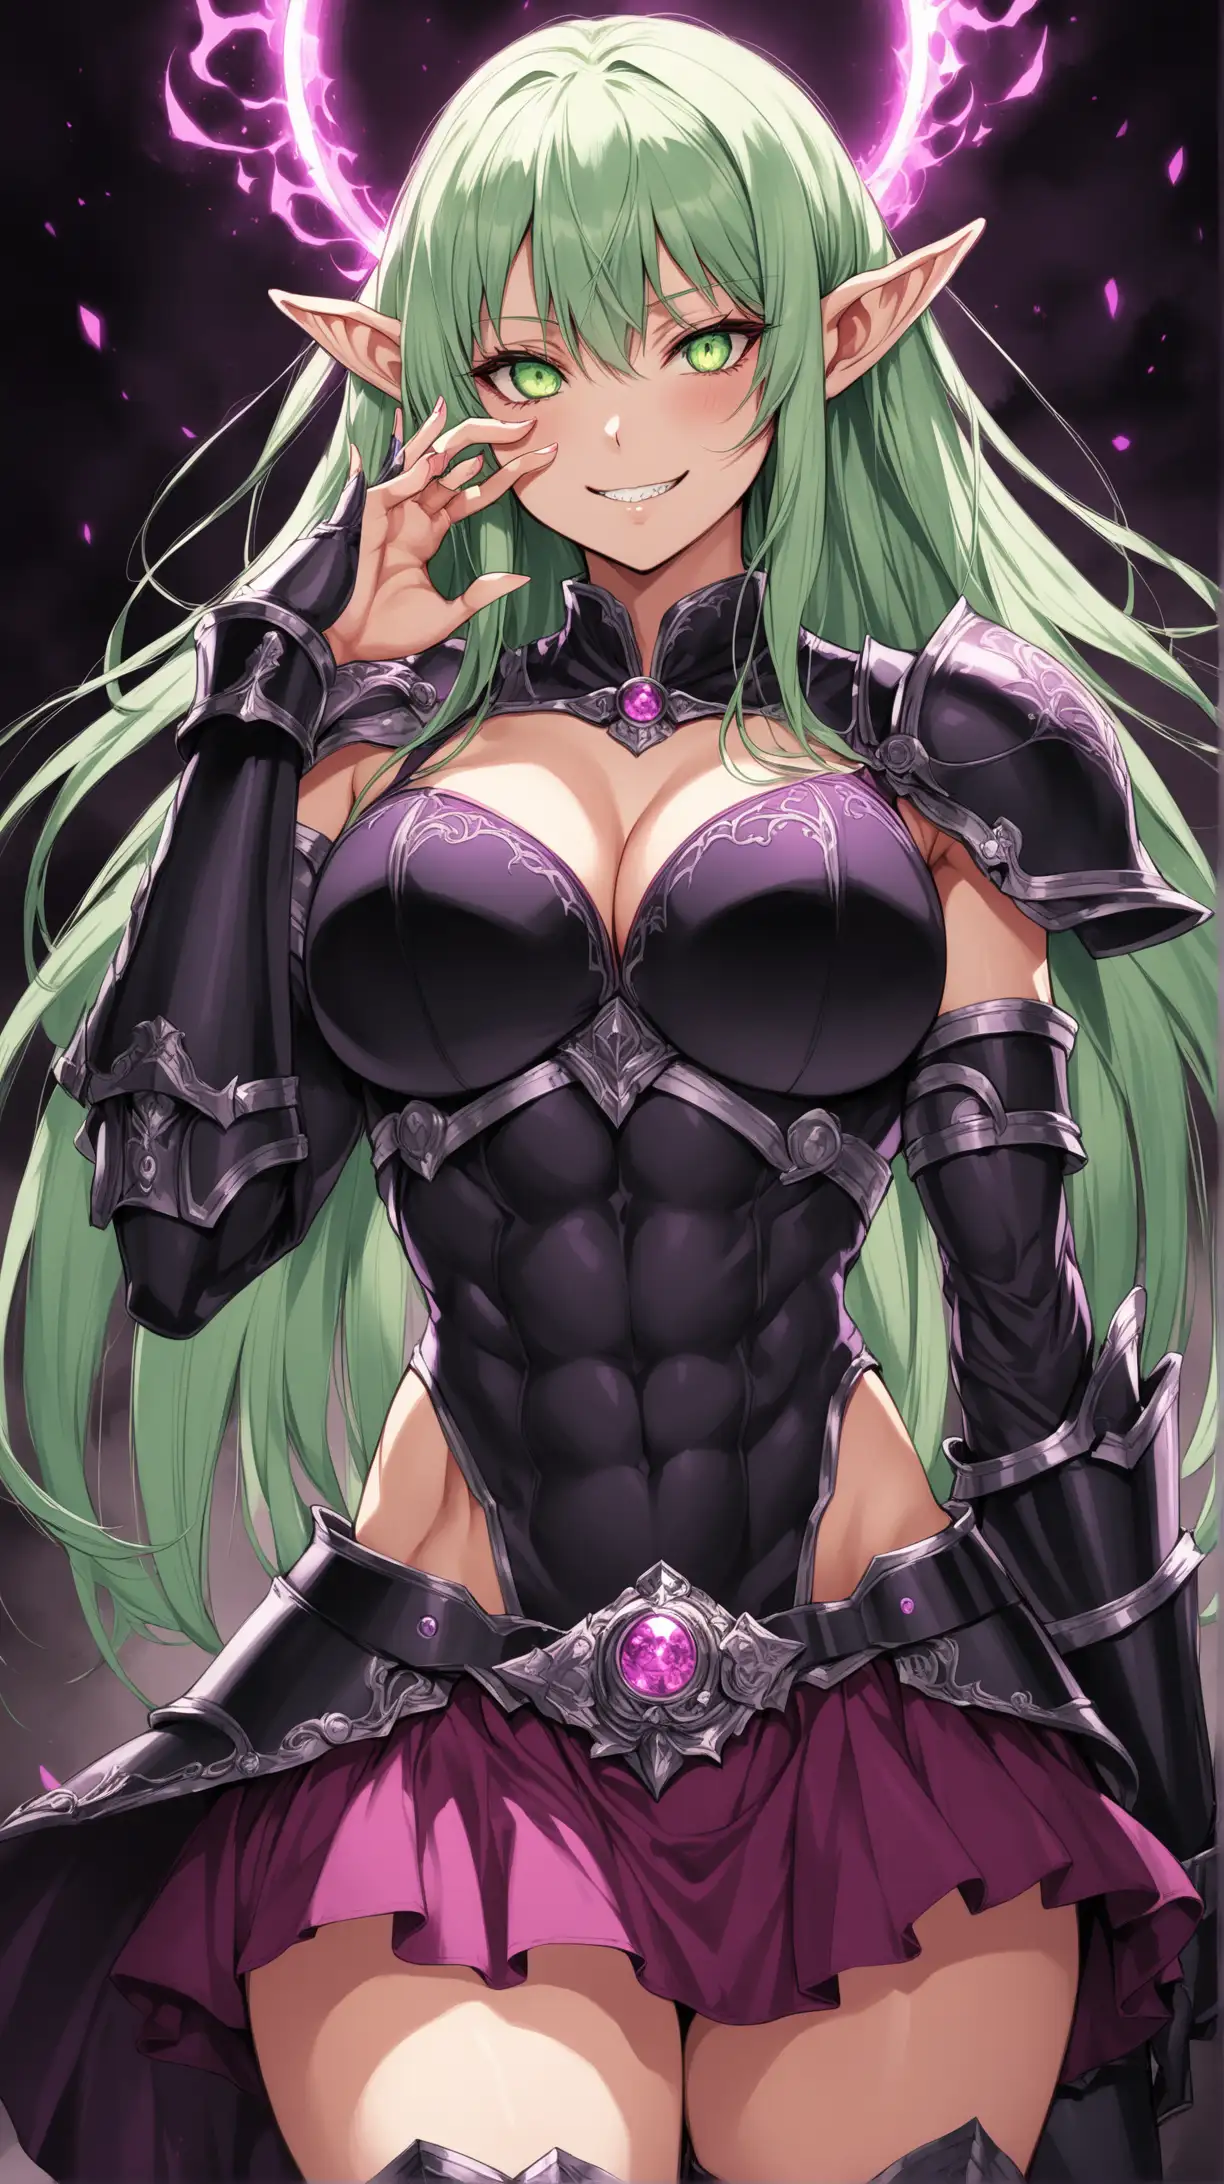 Formidable Female Elf with Yandere Aura in Gothic Armor